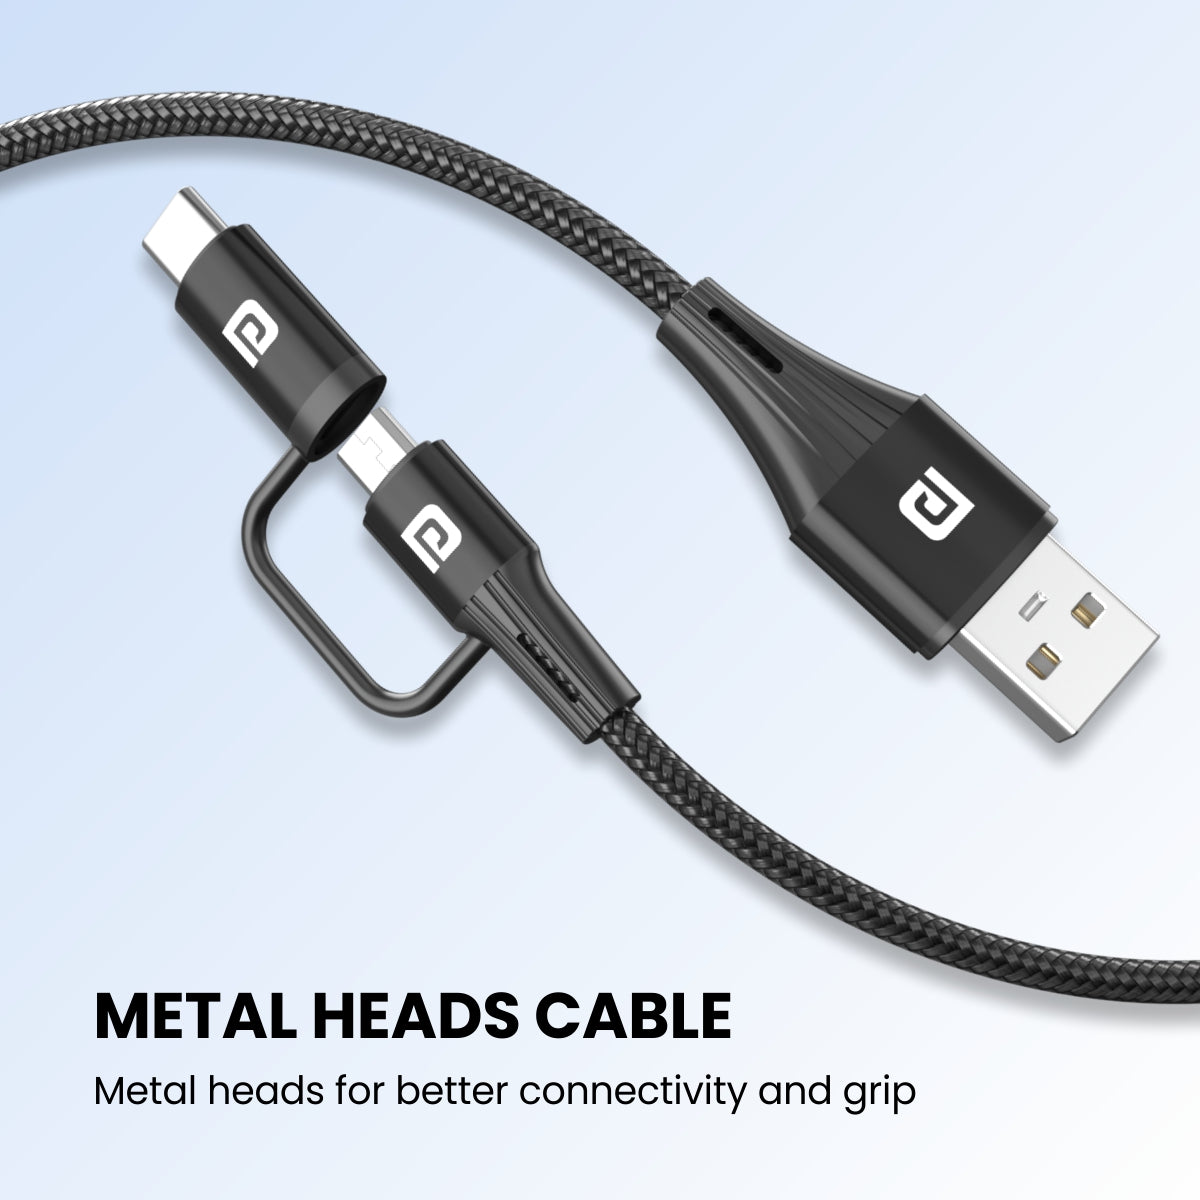 Portronics Konnect J7 Dual headed Cable Micro and Type C Cable with metal head. Black 